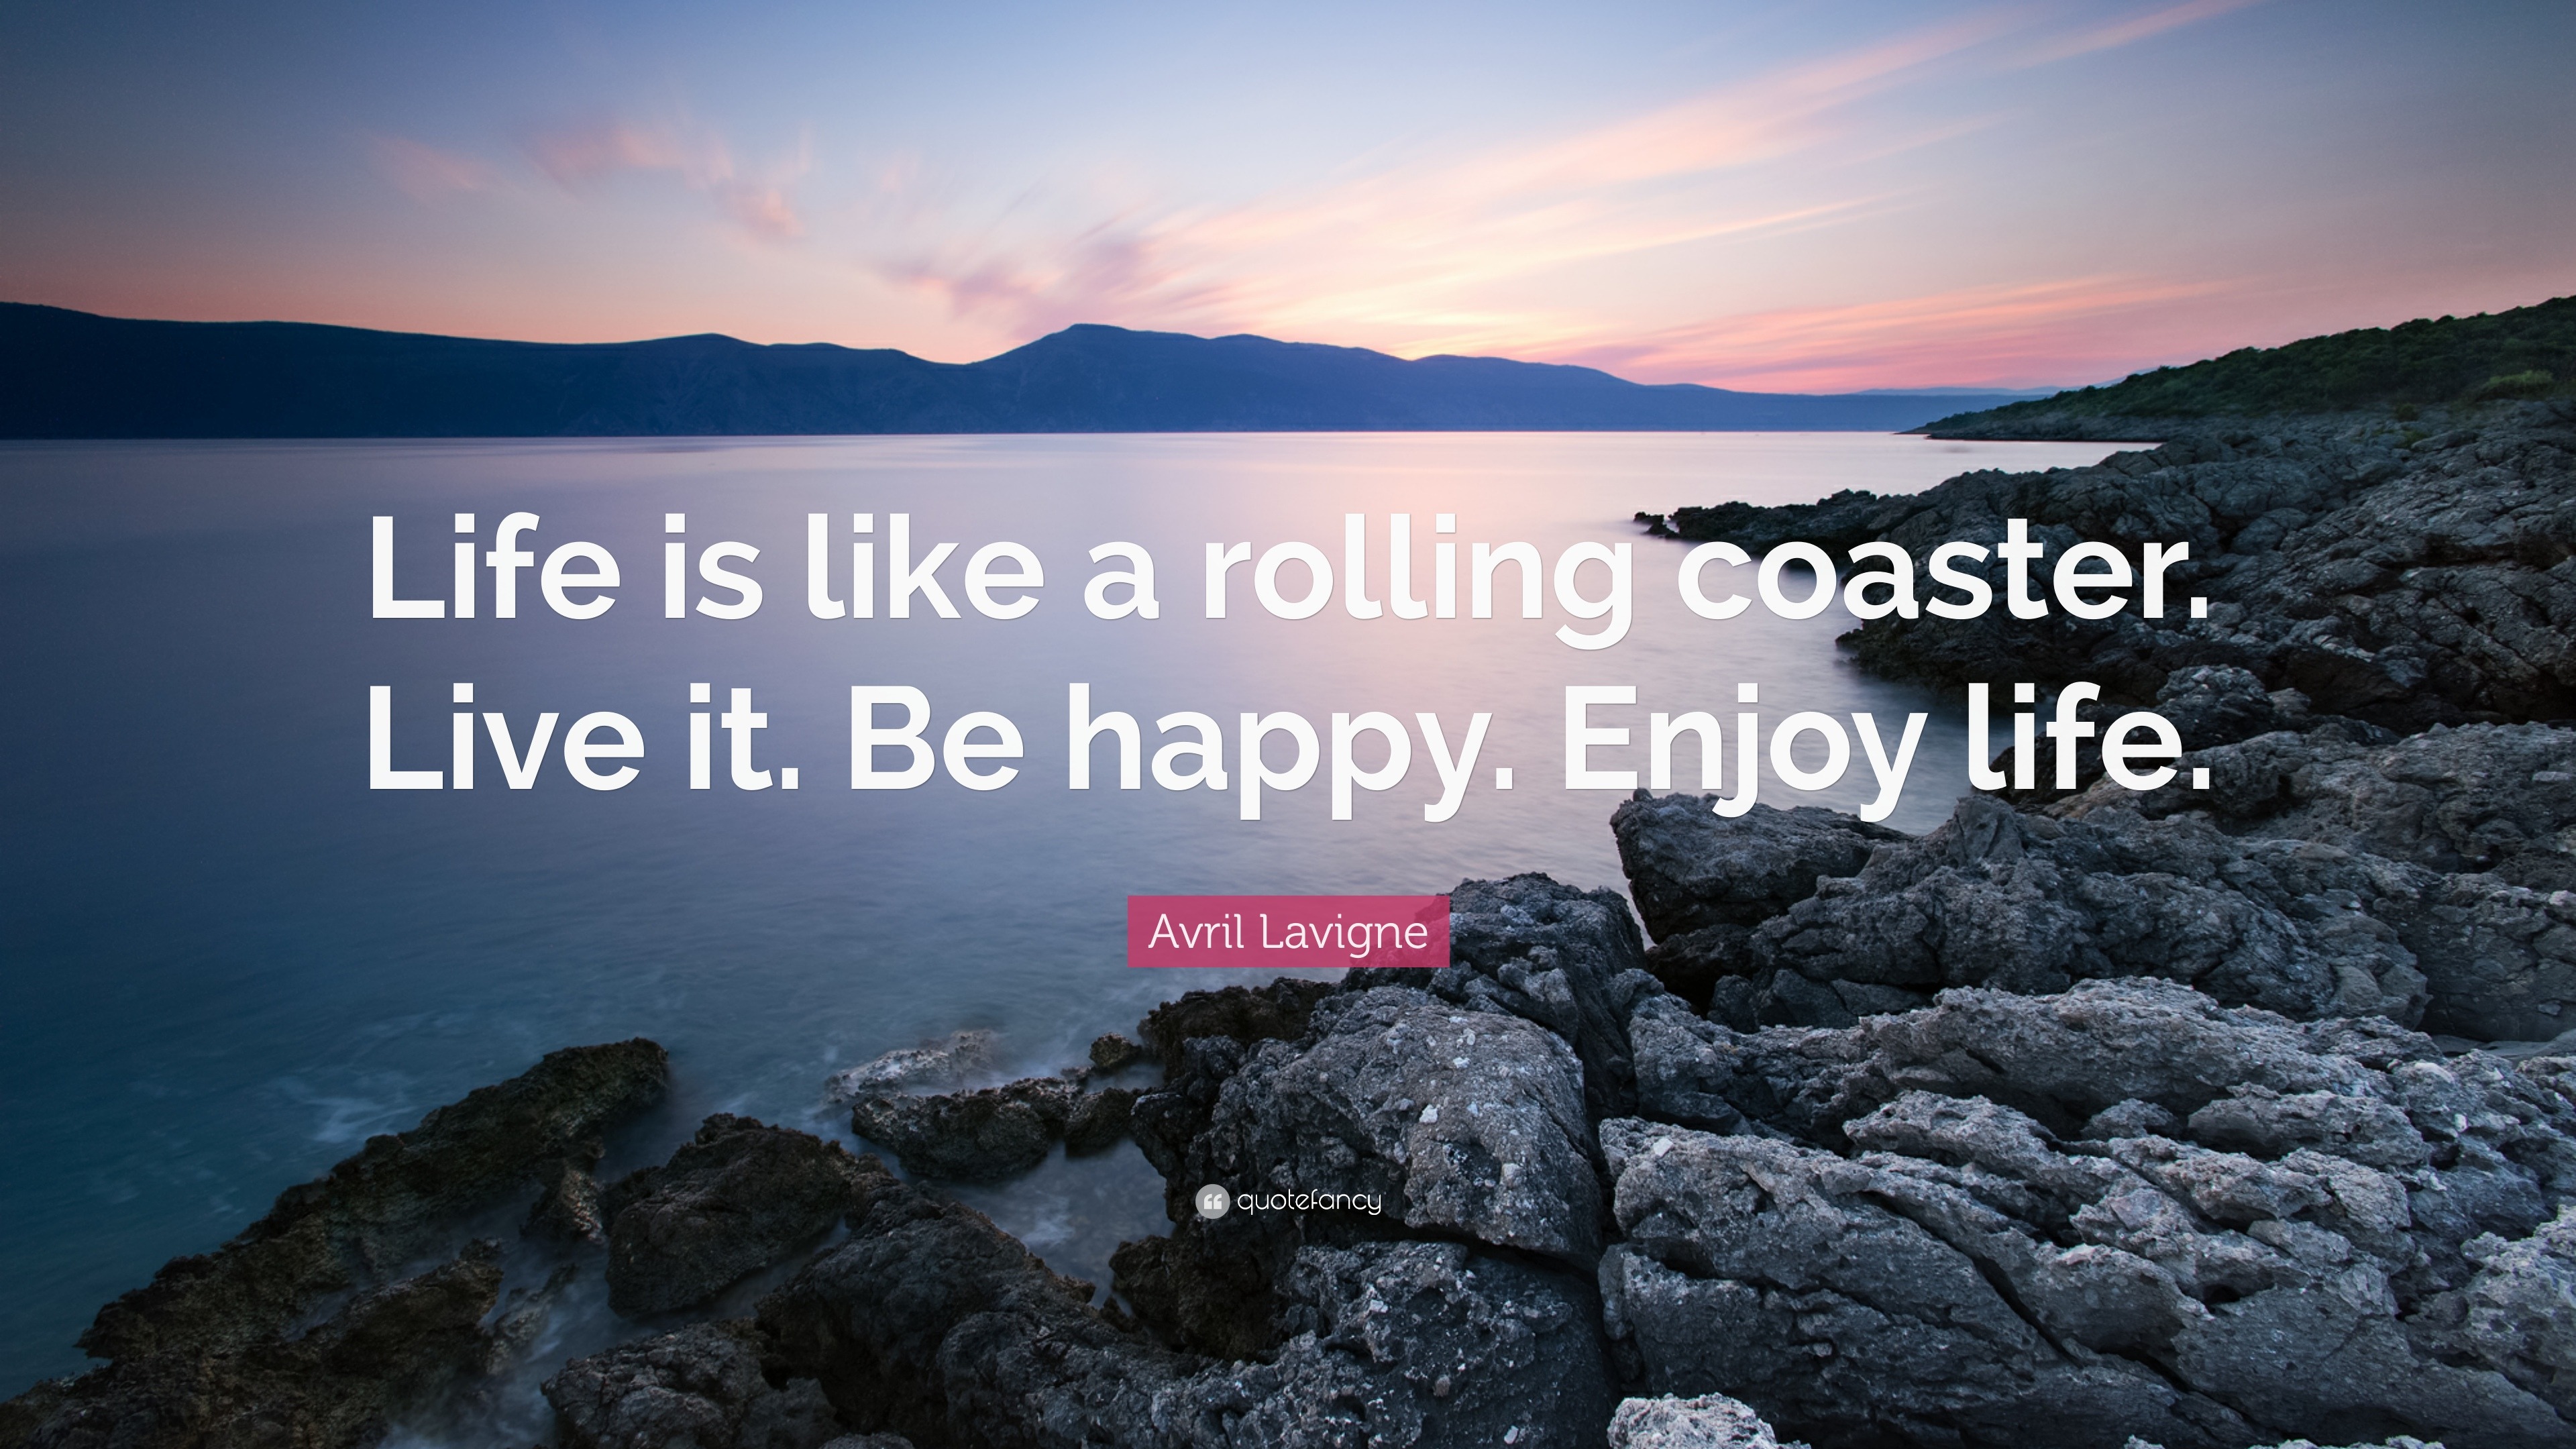 Avril Lavigne Quote “Life is like a rolling coaster Live it Be